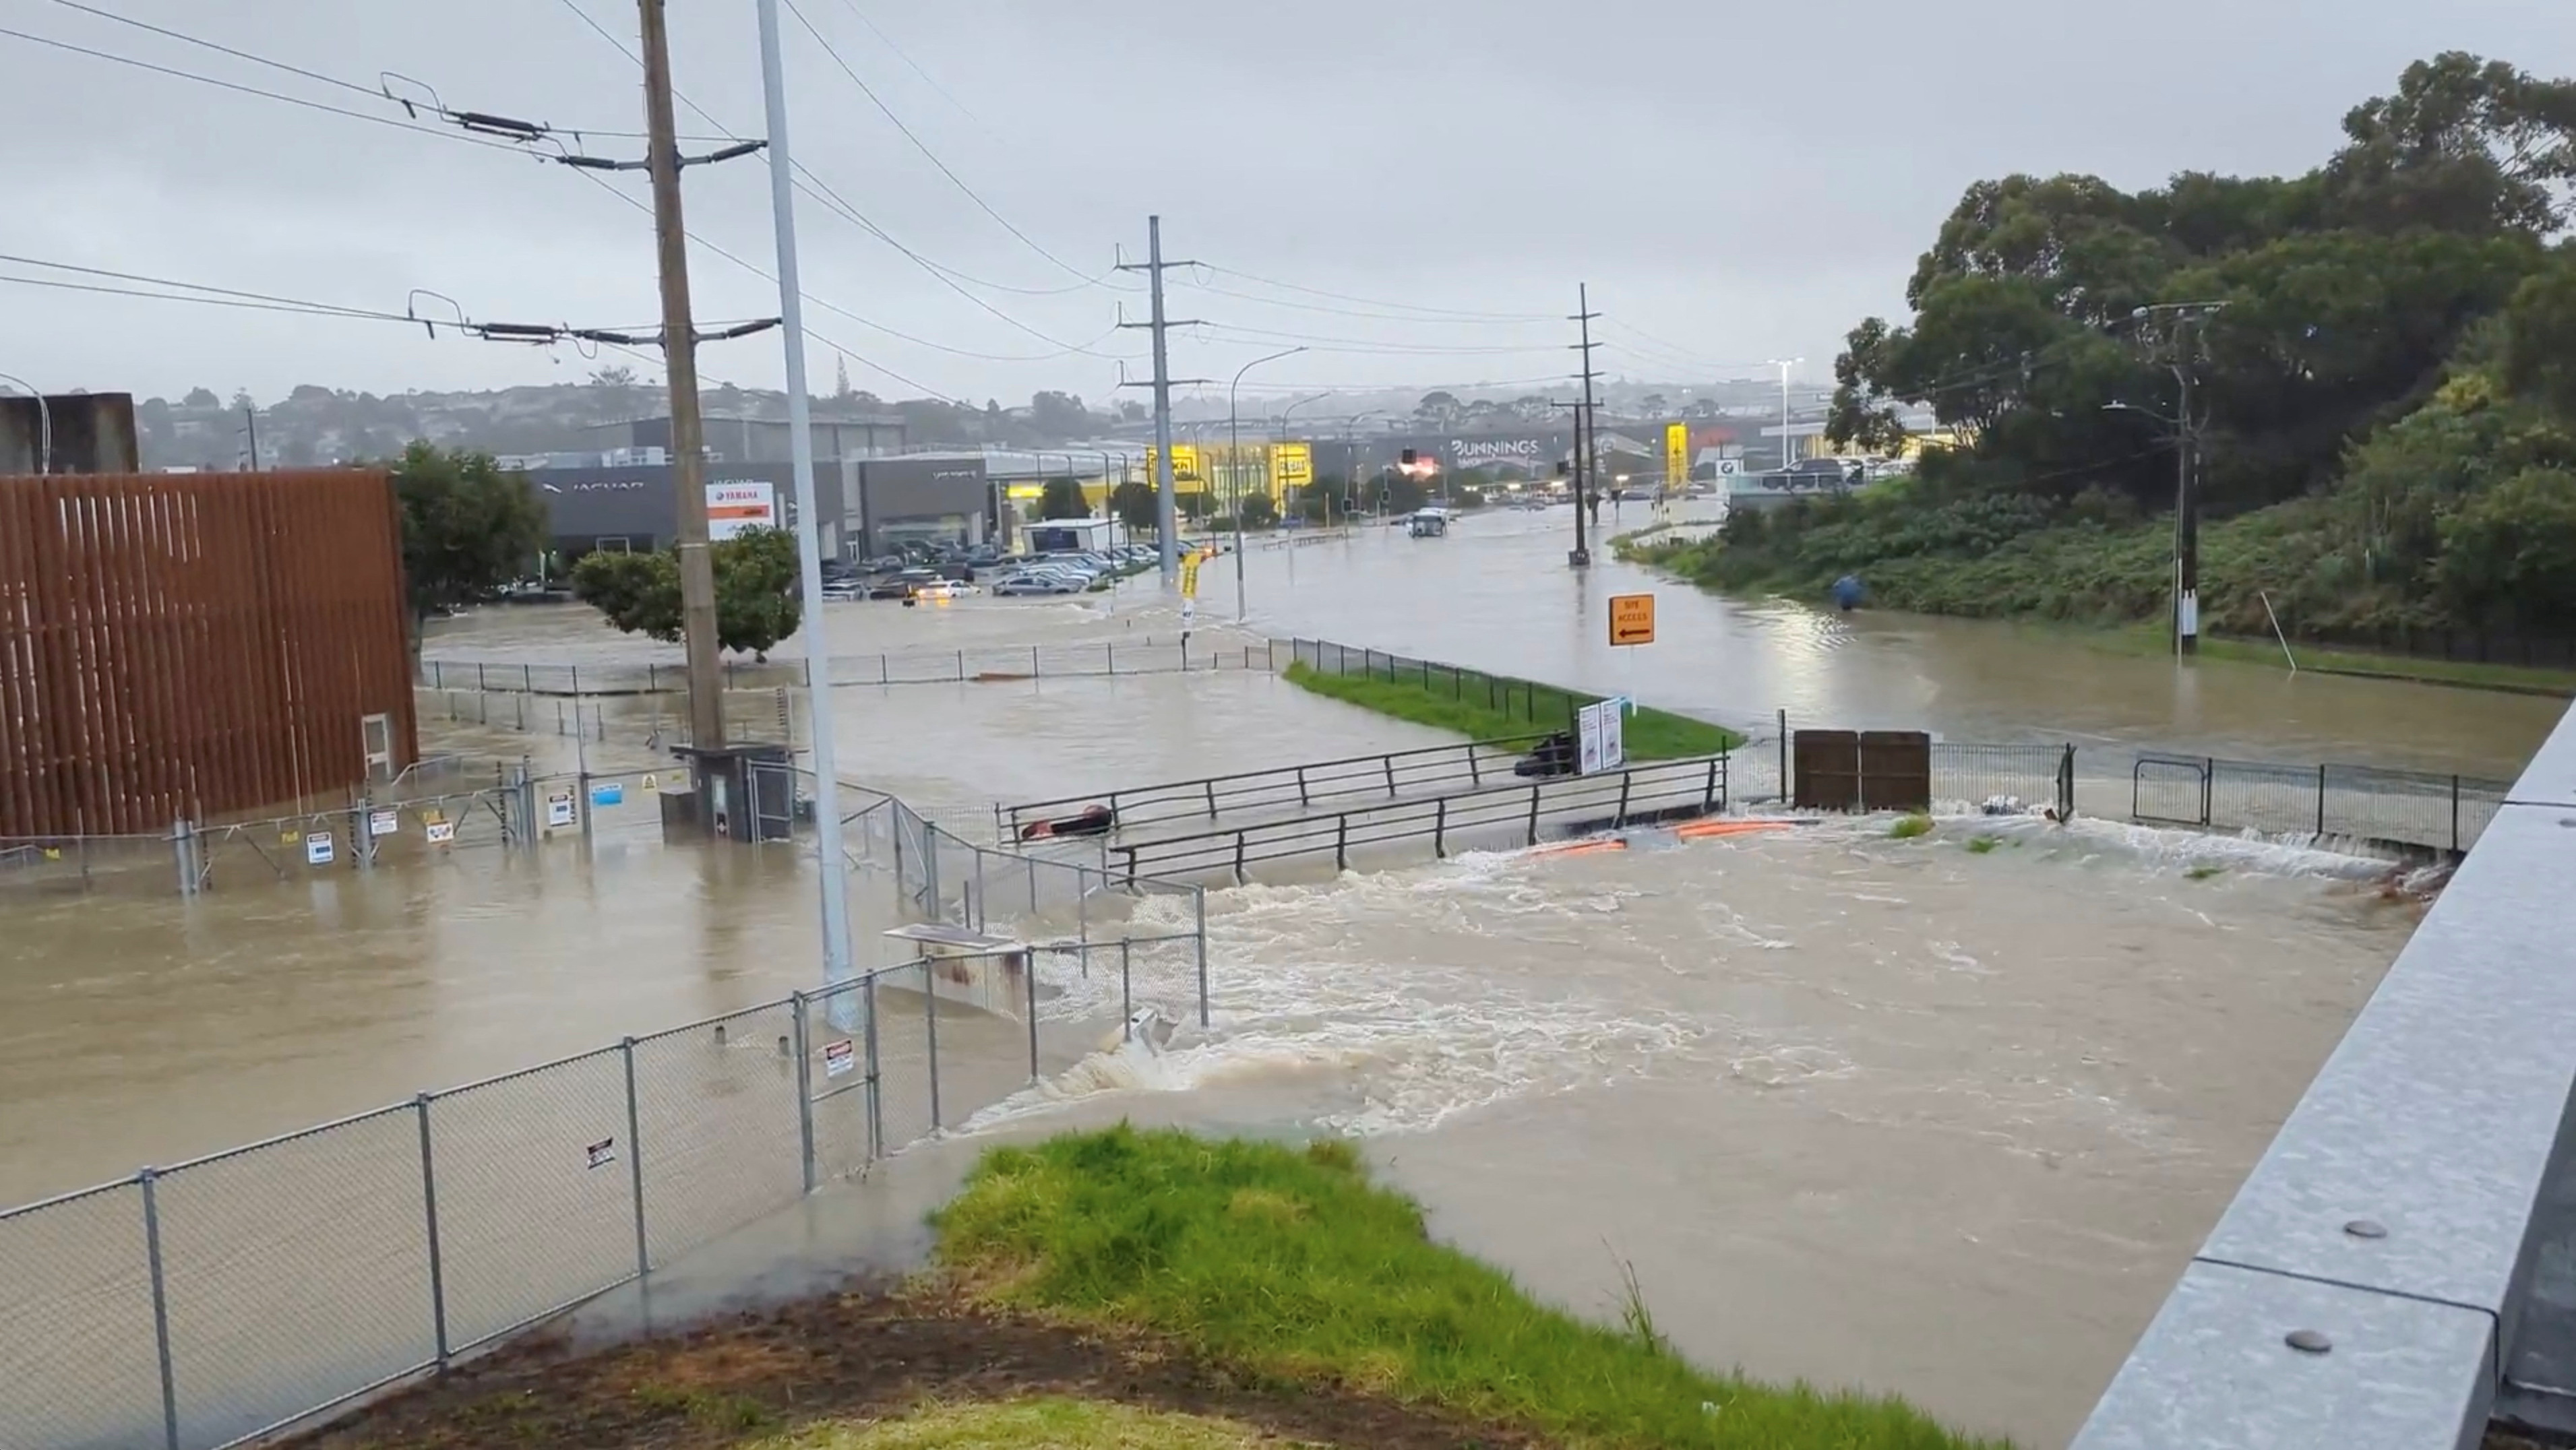 Heavy rains have caused flooding in Auckland